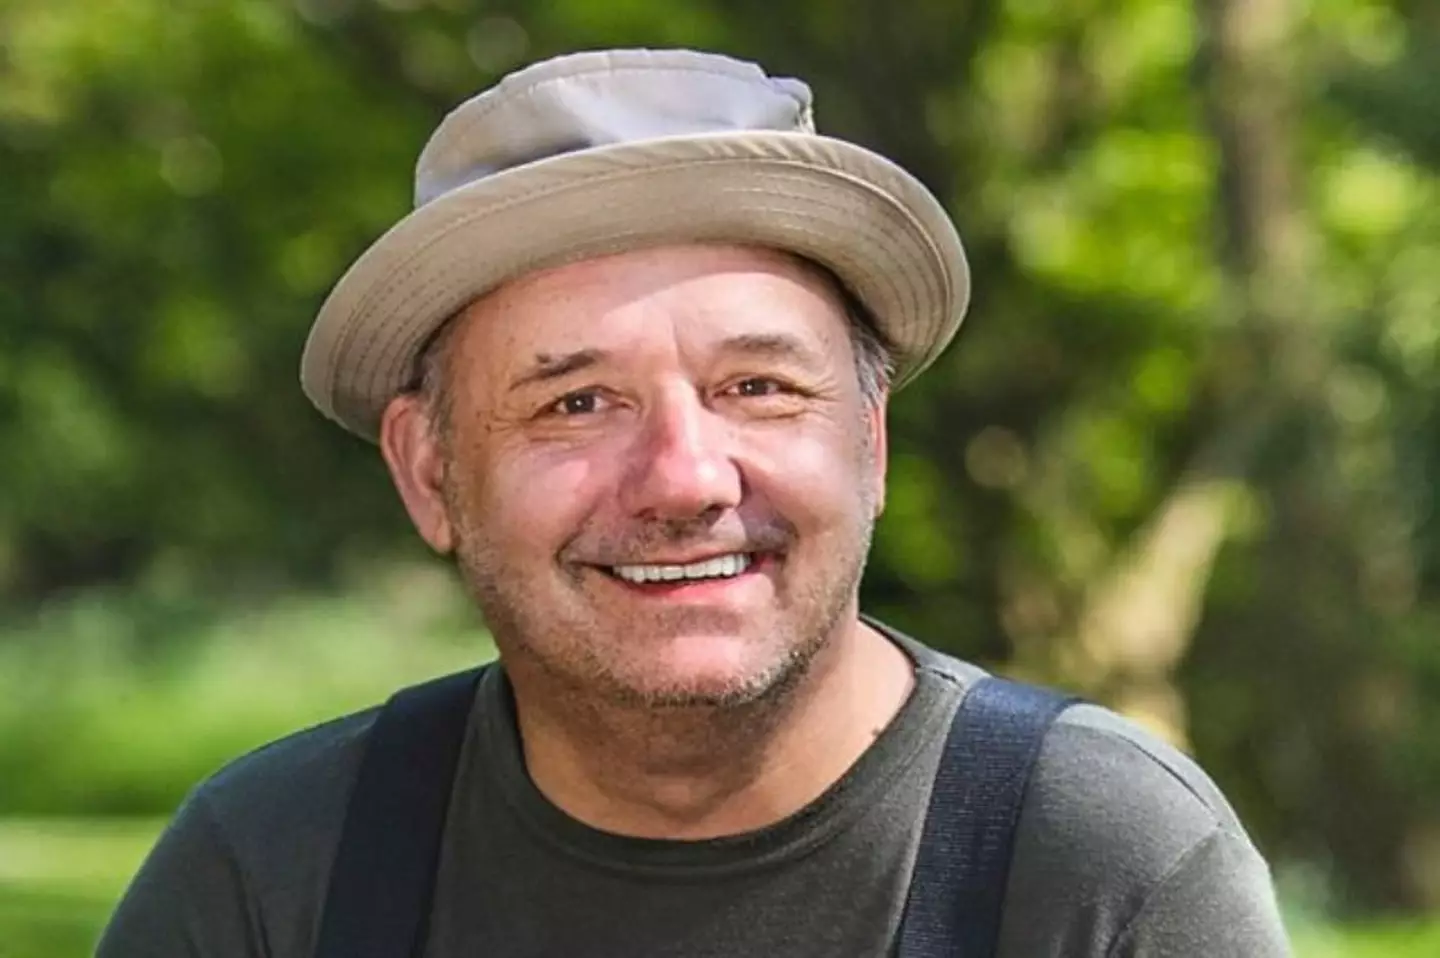 Bob Mortimer has admitted to struggling with his health in the past.